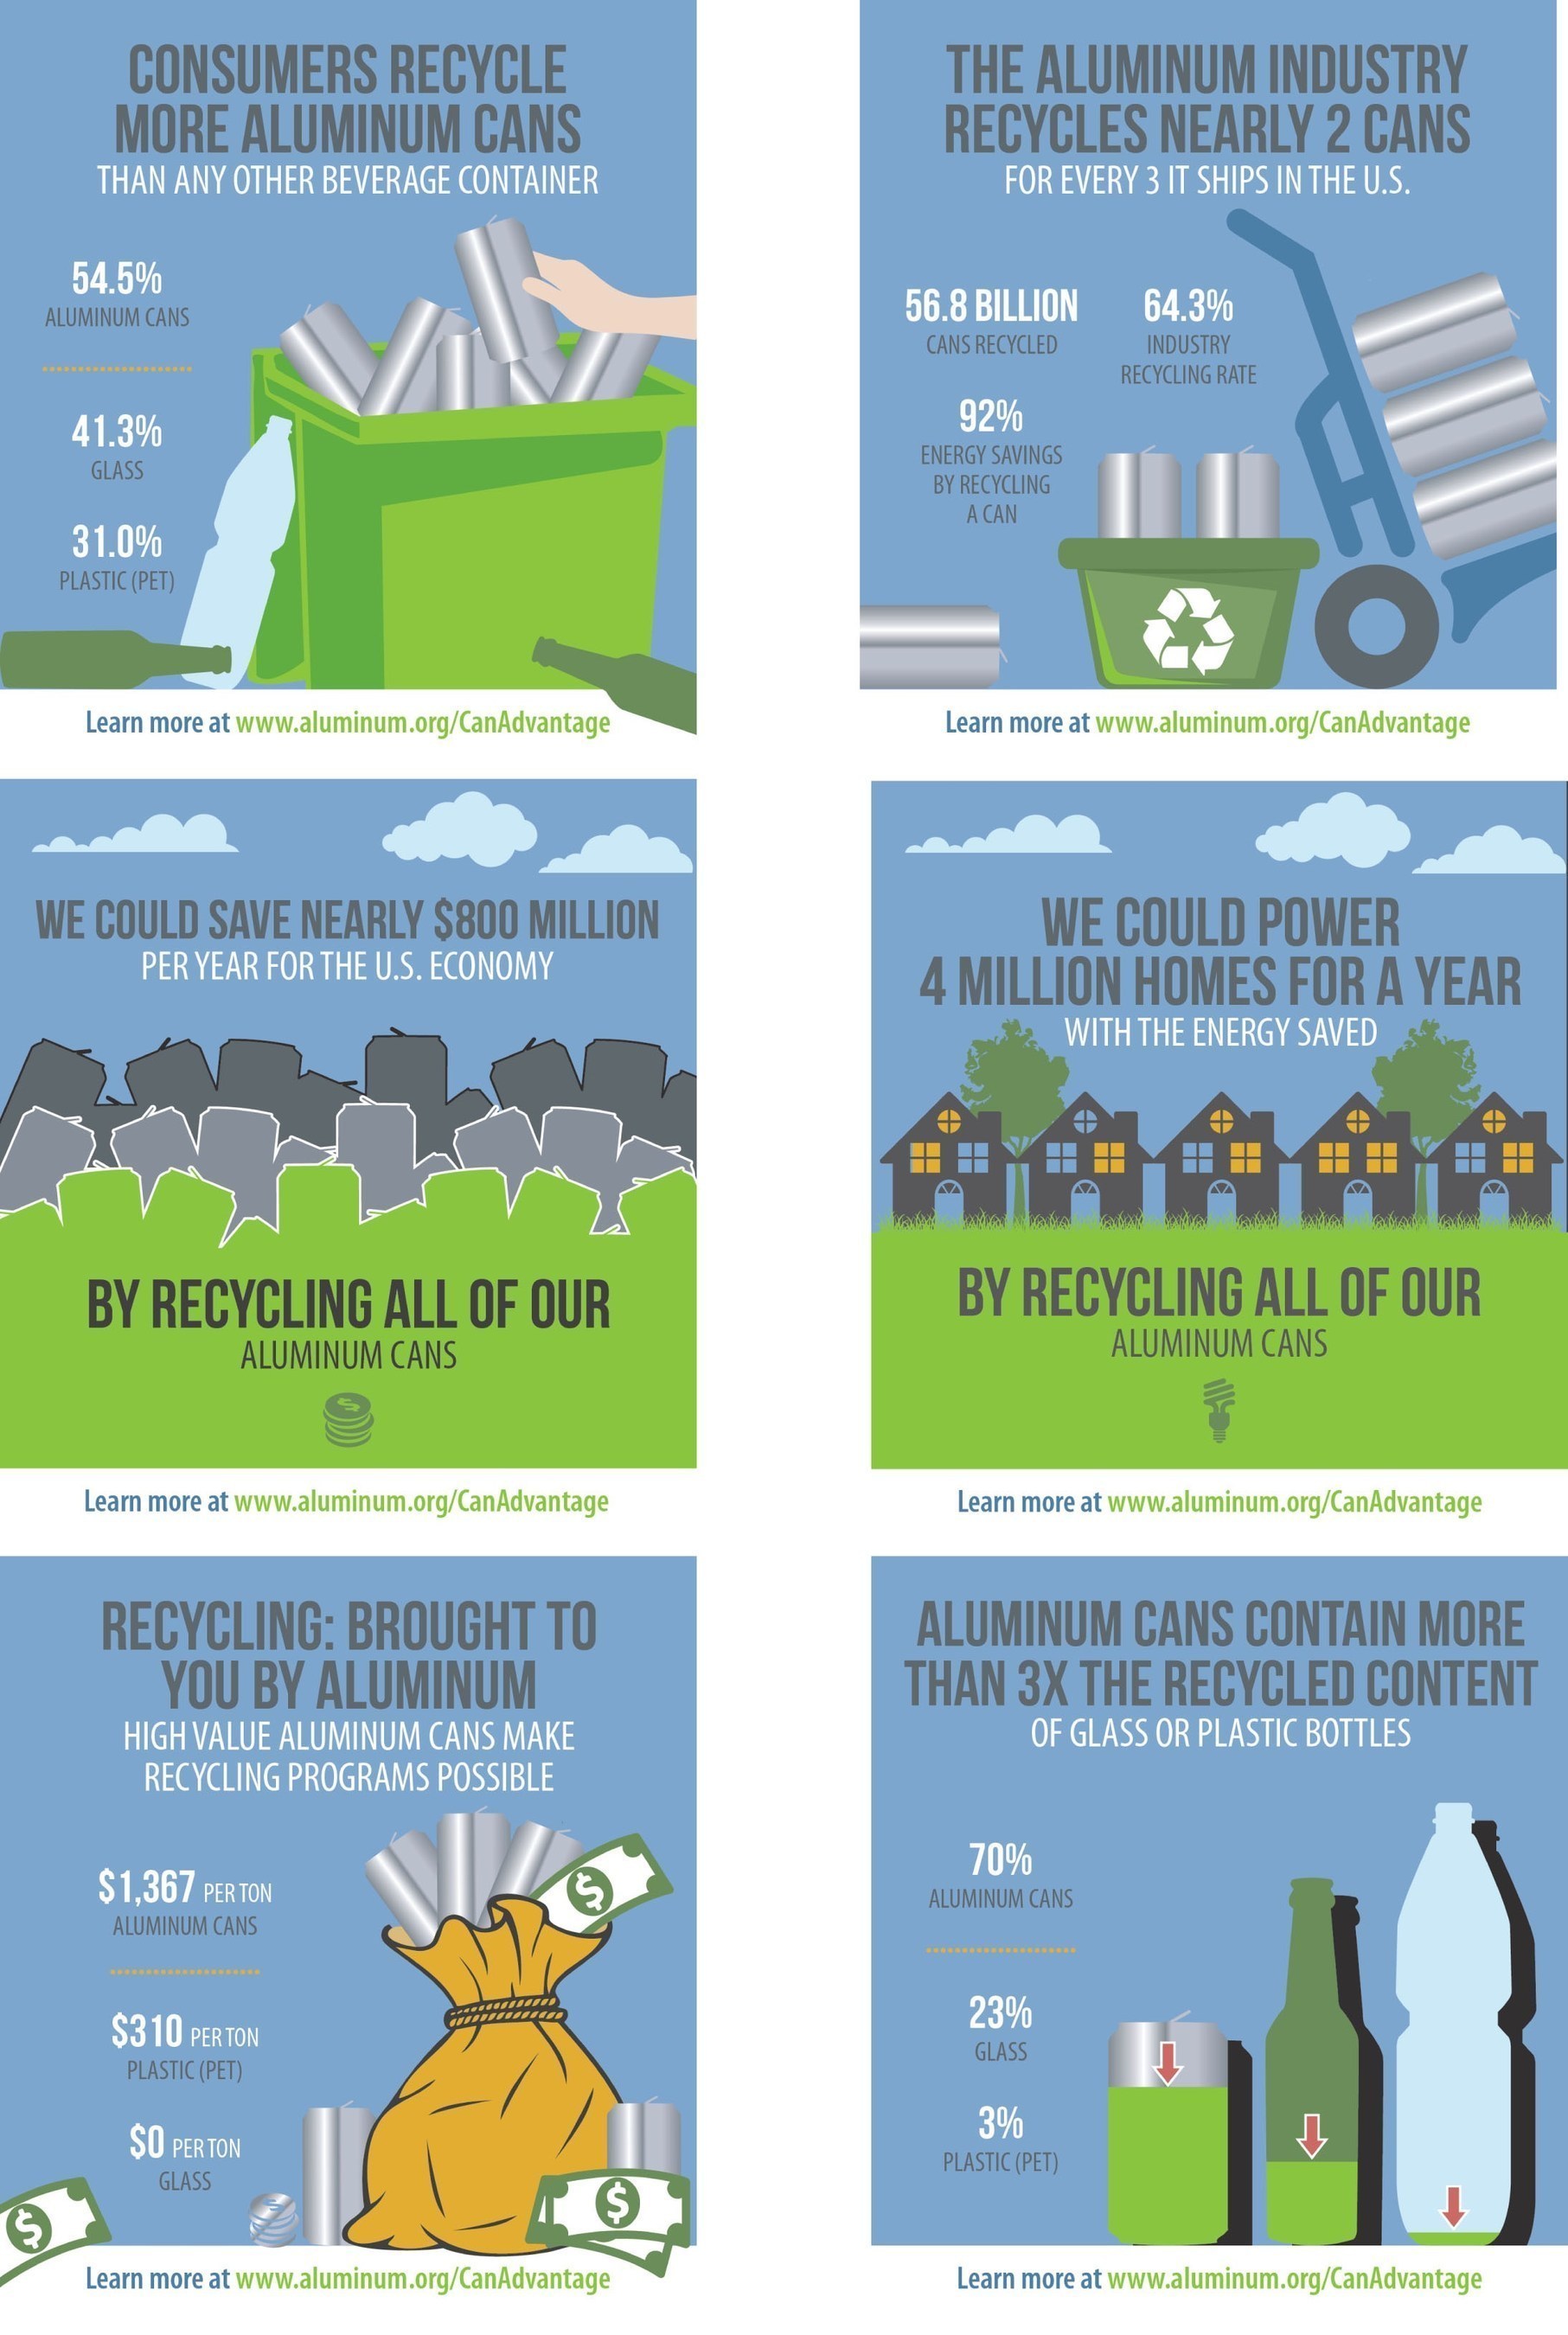 The aluminum can is the most sustainable beverage package type, with by far the highest levels of recycling and material value compared to the competition.